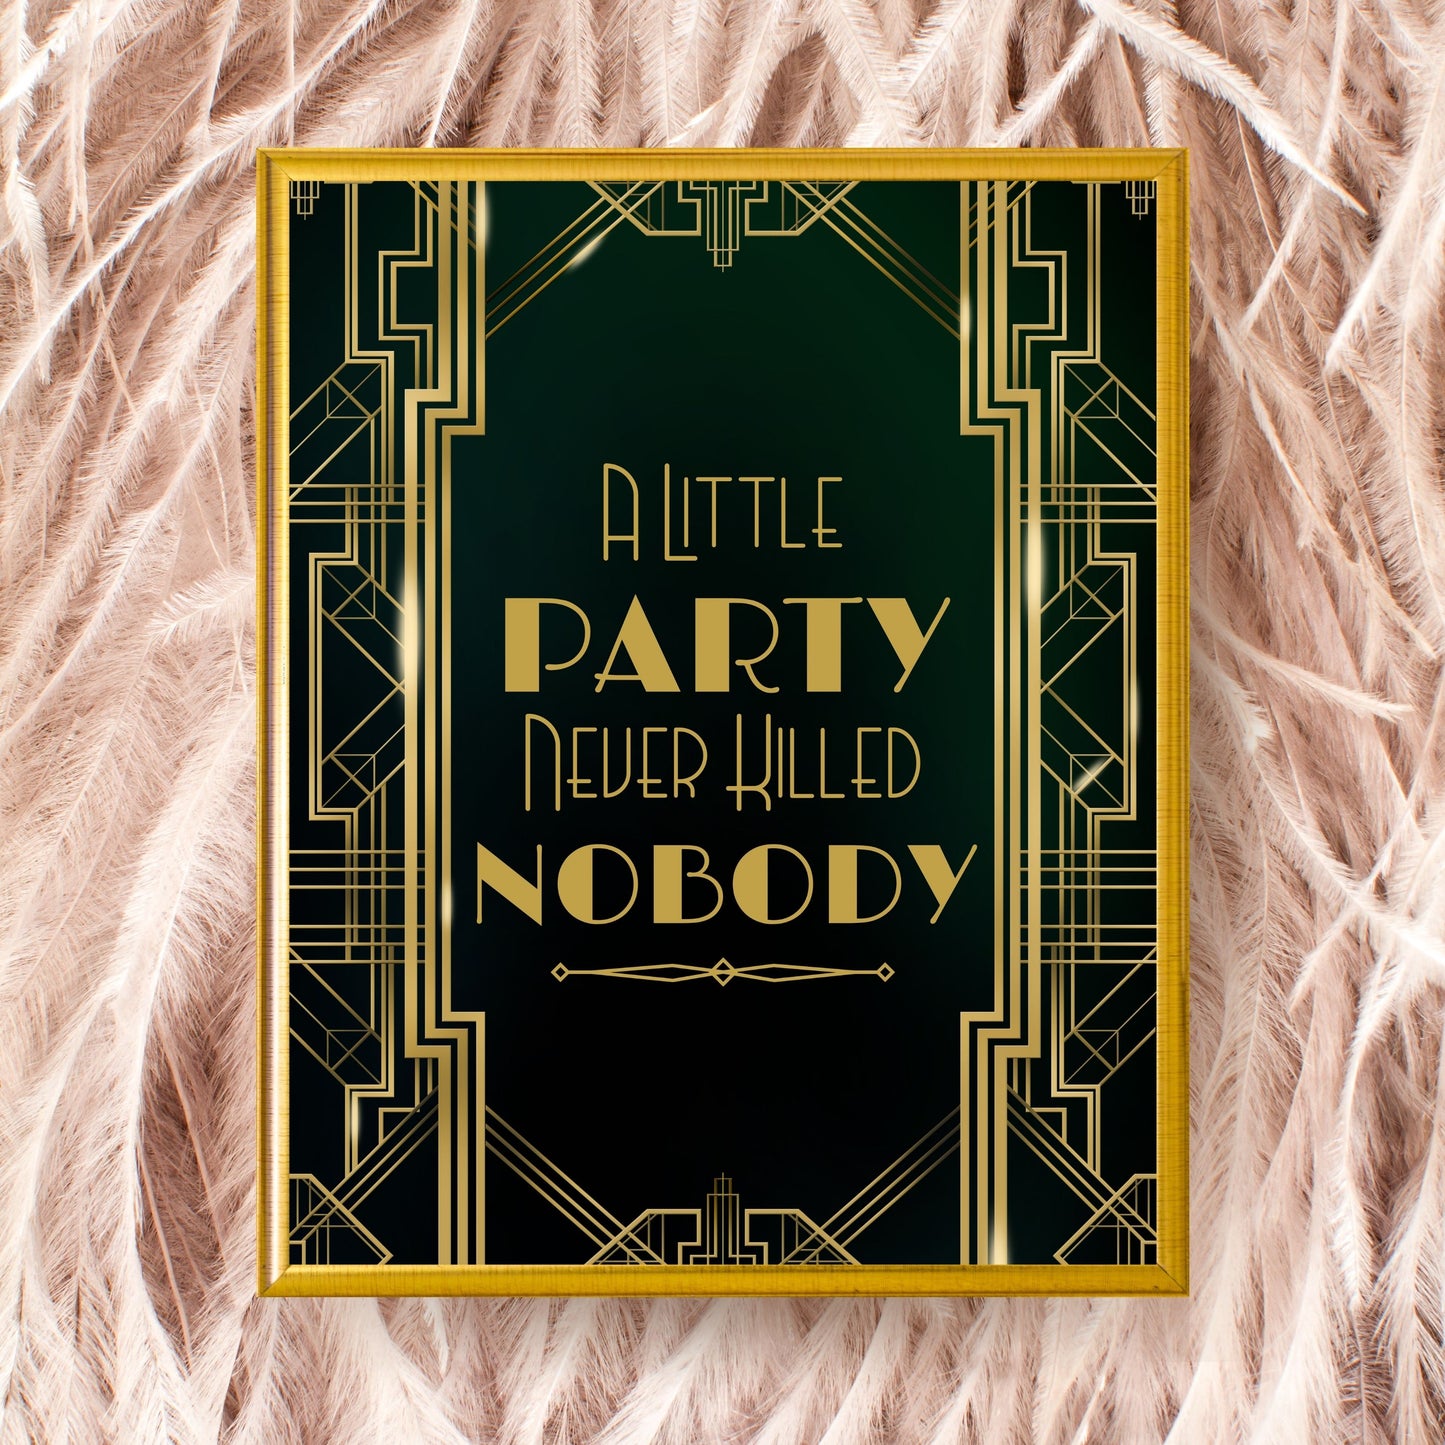 "A Little Party Never Killed Nobody" Art Deco Printable Party Sign For Great Gatsby or Roaring 20's Party Or Wedding, Black & Gold, Printable Party Decor